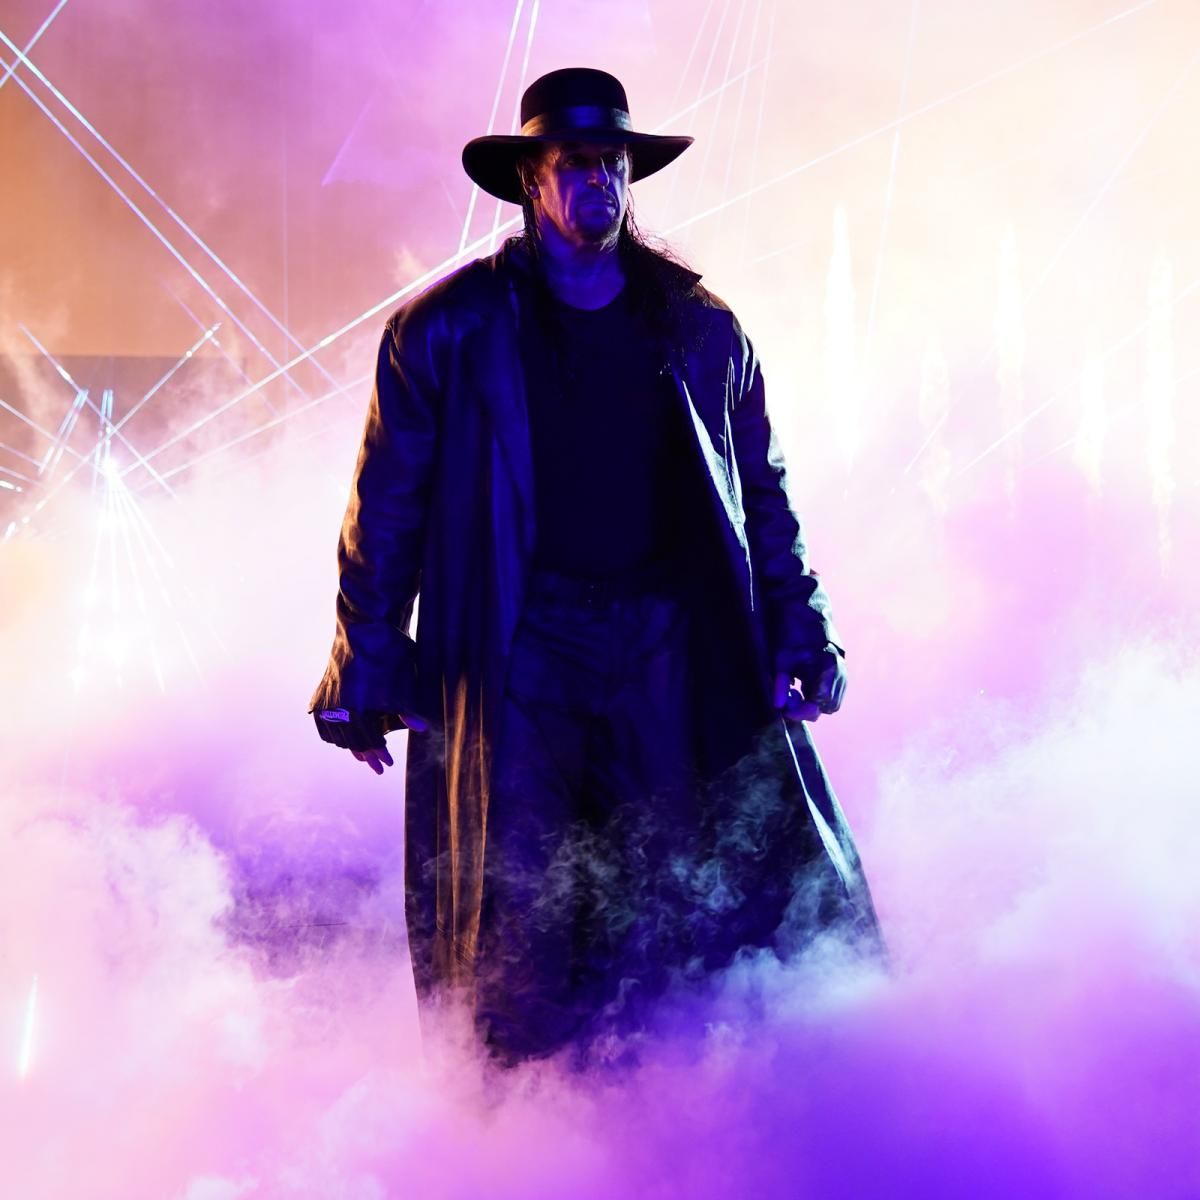 The Undertaker and Shawn Michaels Fight That Almost Was